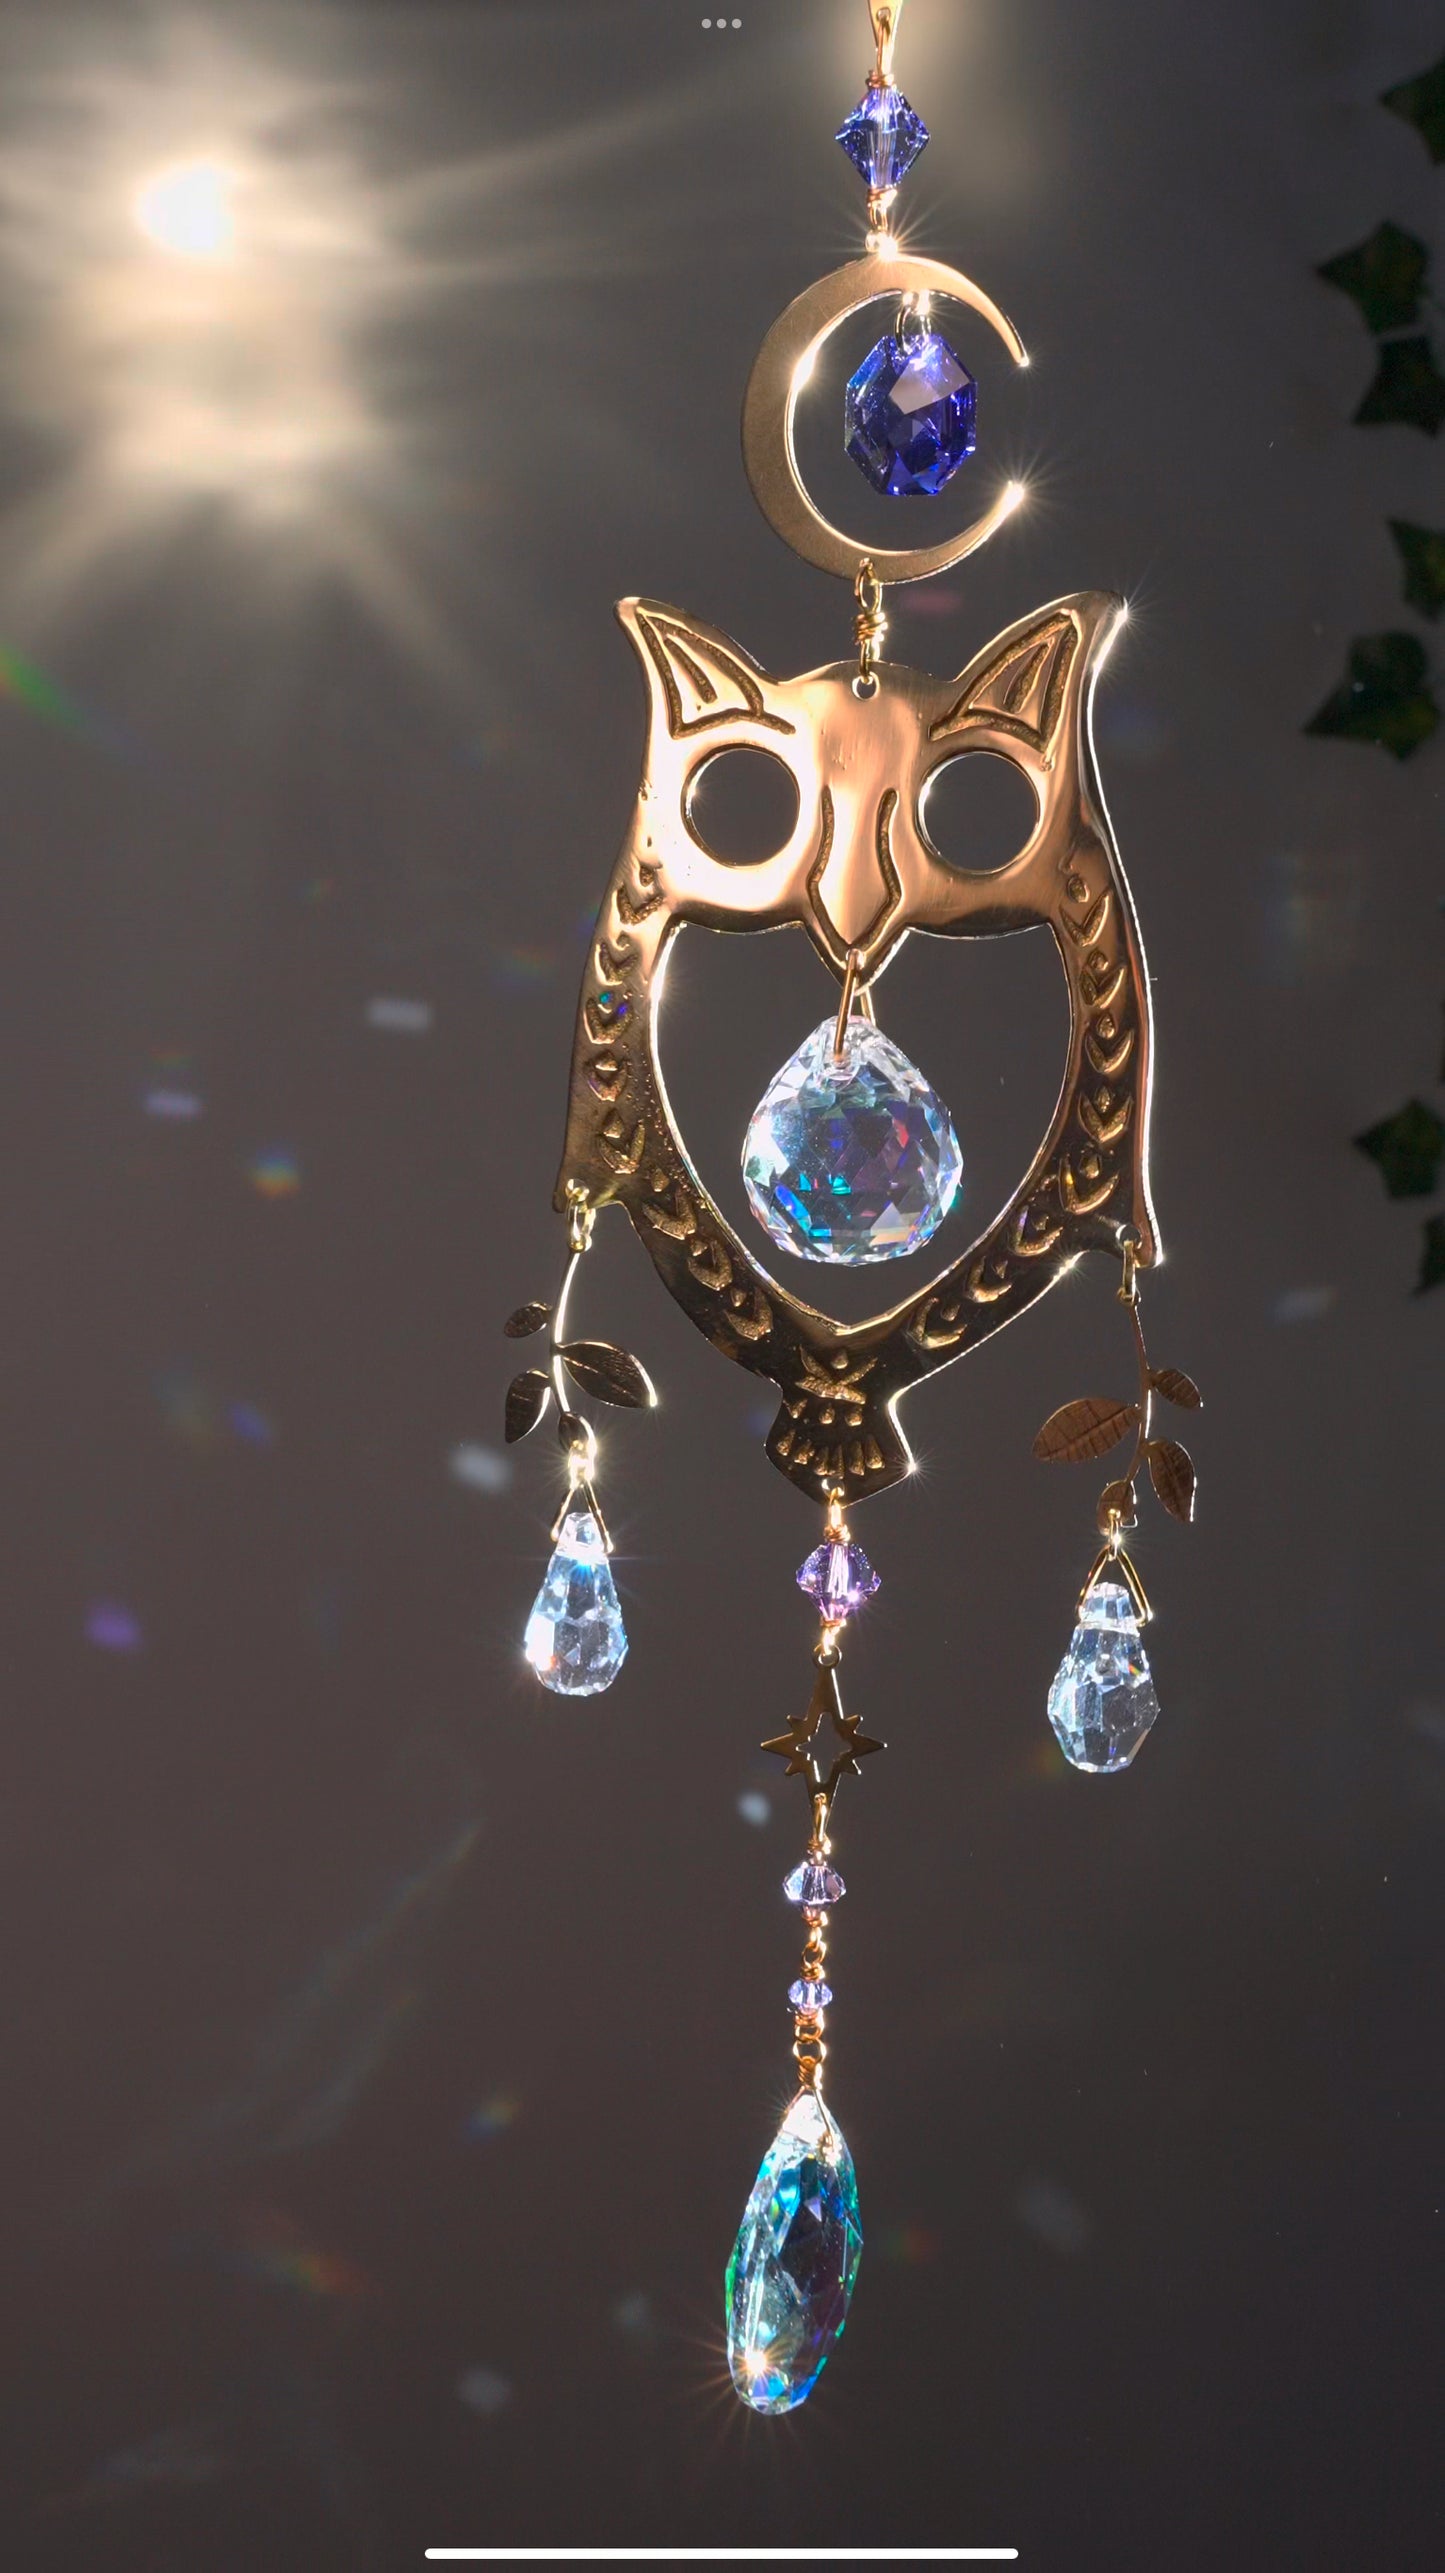 "Night Owl" ~ Mini Suncatcher, boho witchy room decor made with Brass and Crystal Prisms